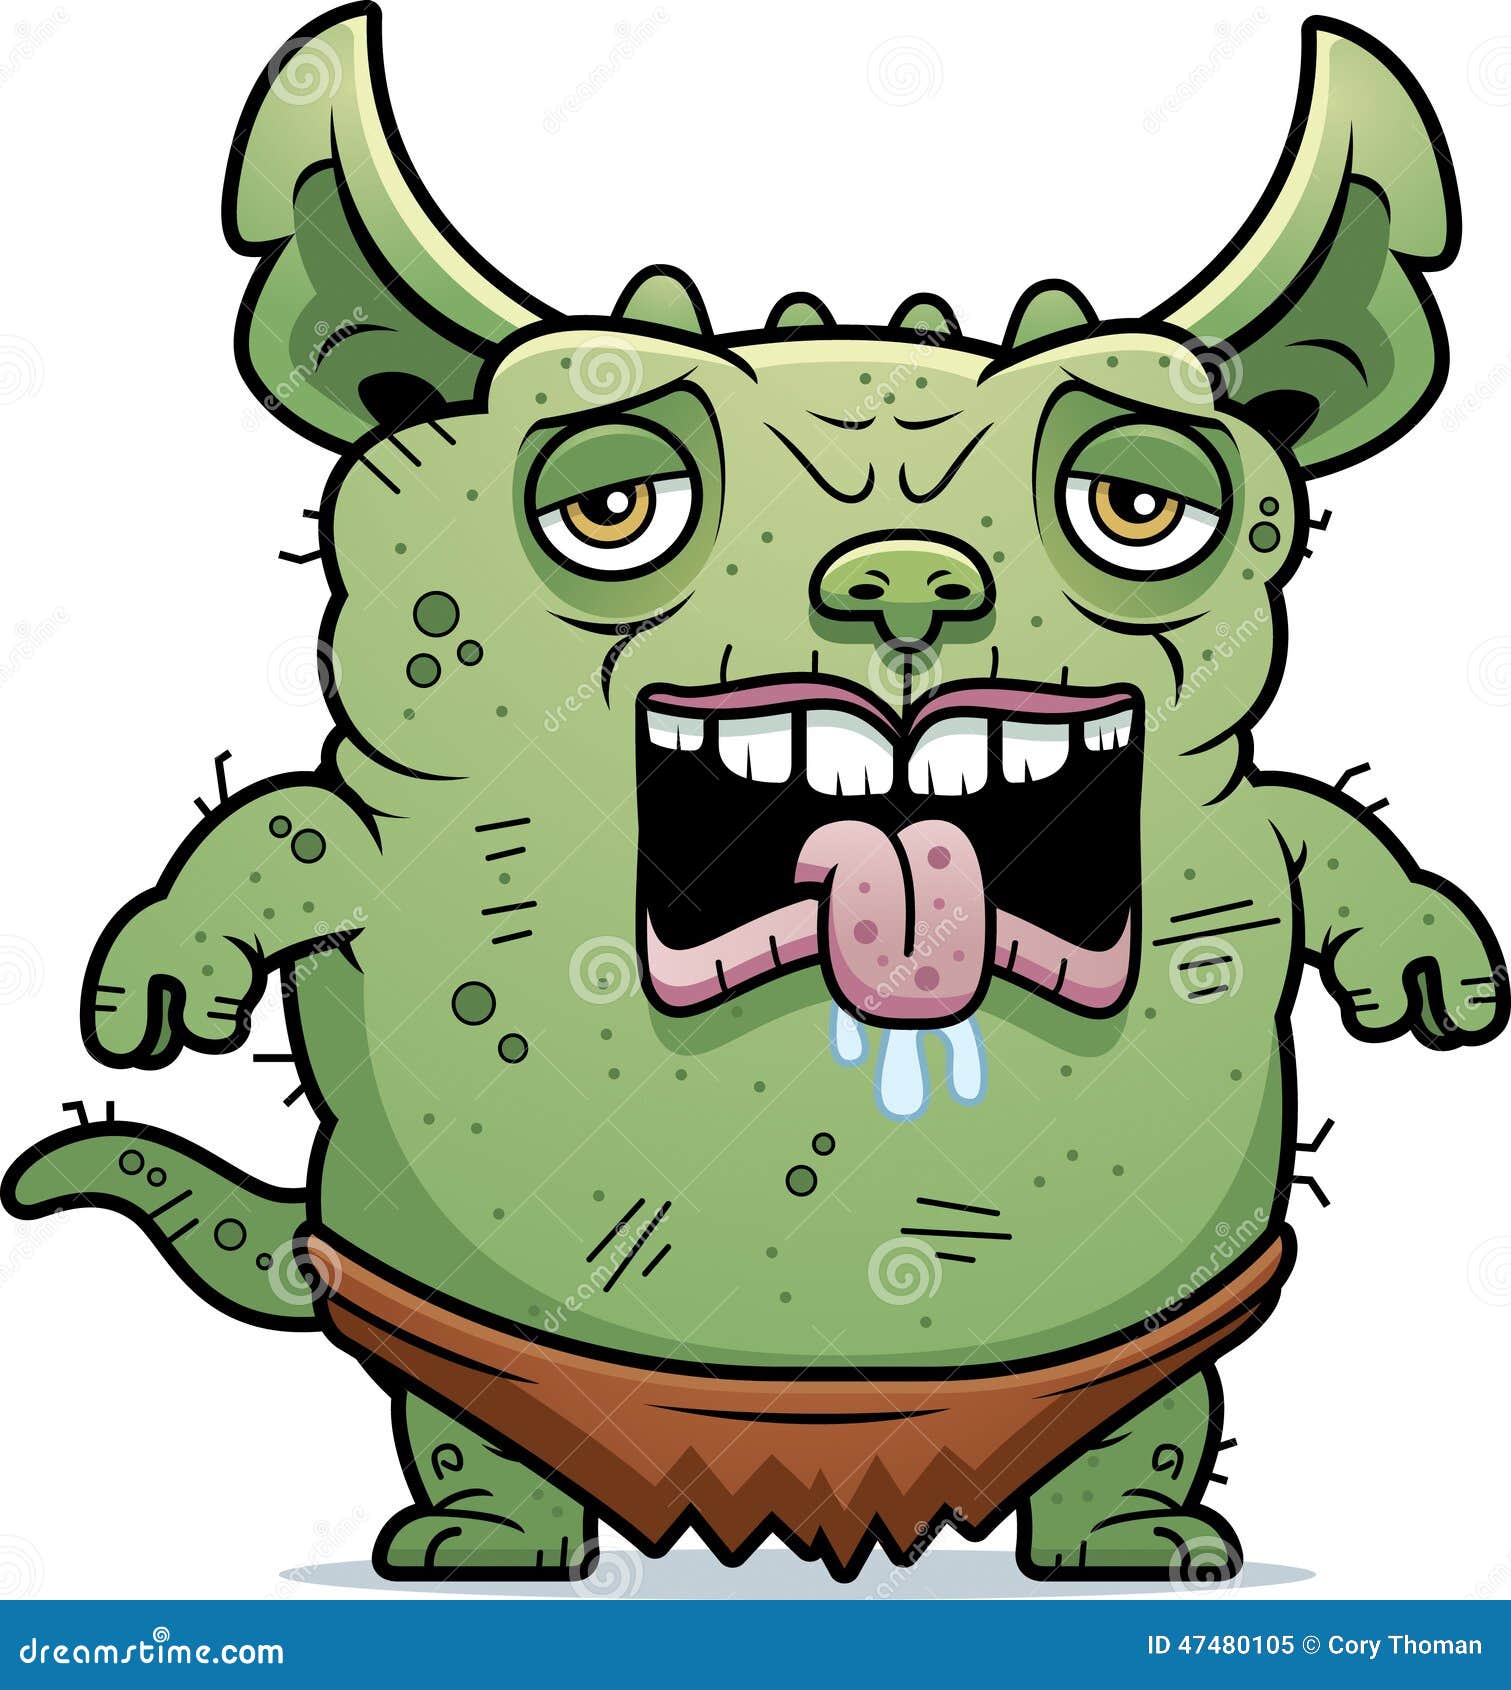 ugly clipart images - photo #39